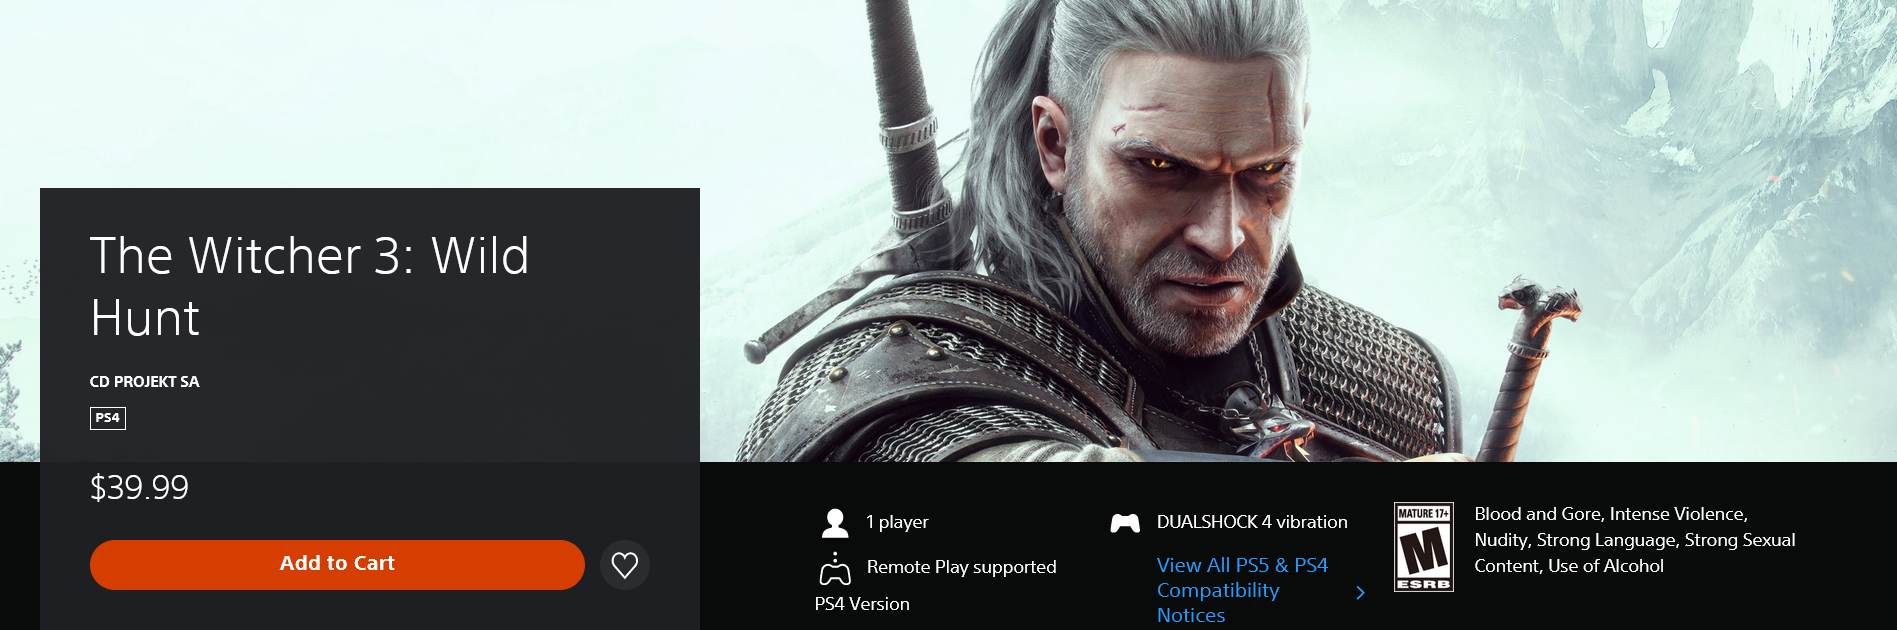 Time for new changes: CD Projekt Red updates The Witcher 3: Wild Hunt cover art on PlayStation, Xbox, and Steam digital stores-2